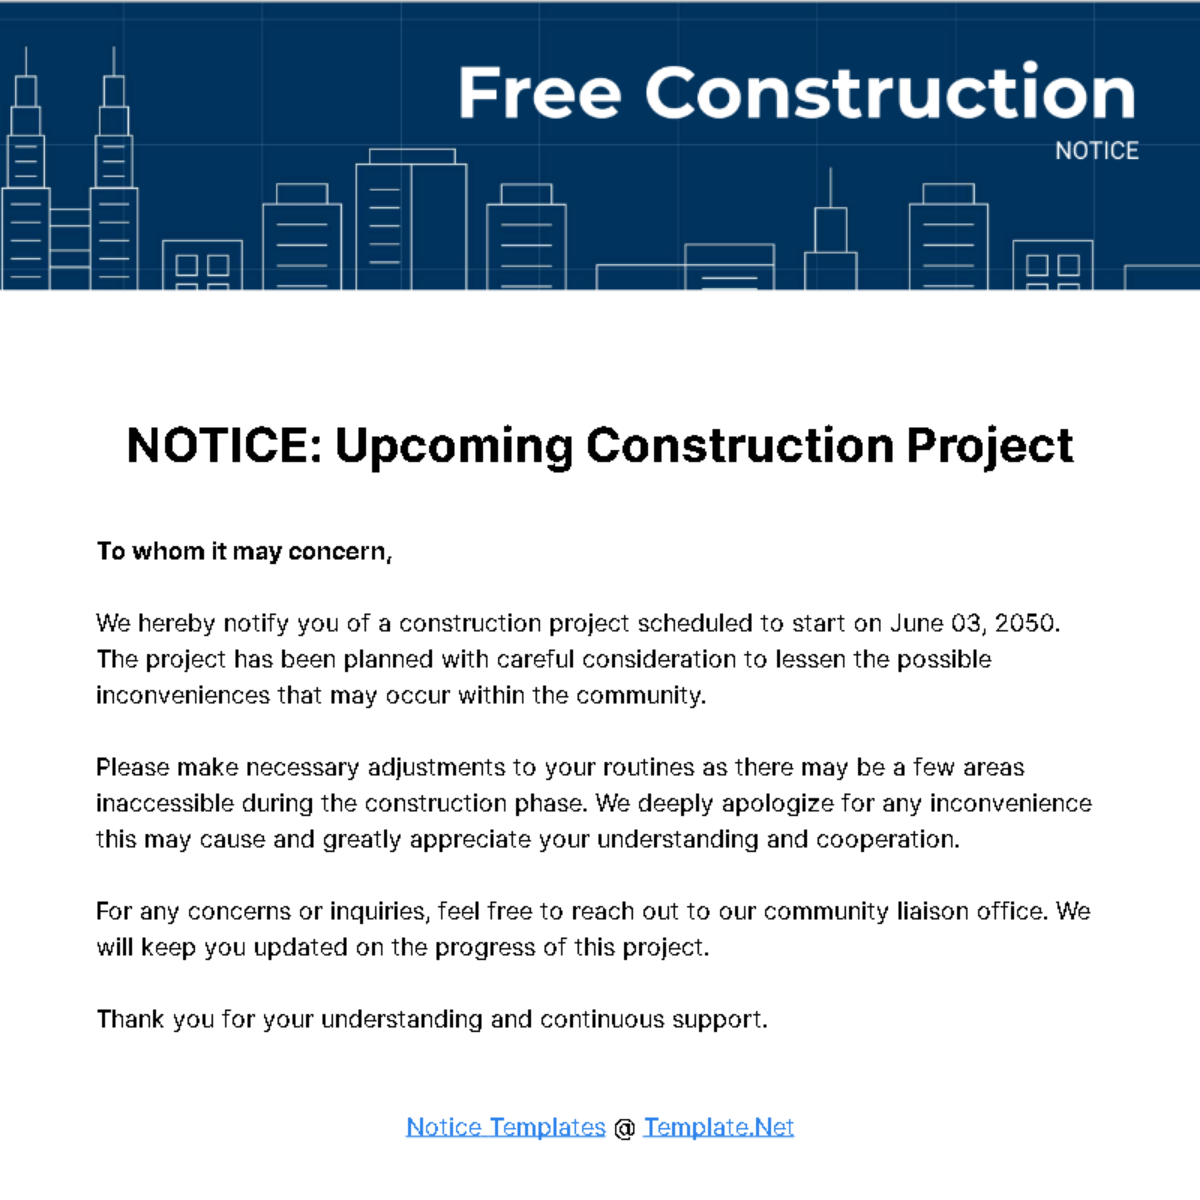 Free Construction Notice Template